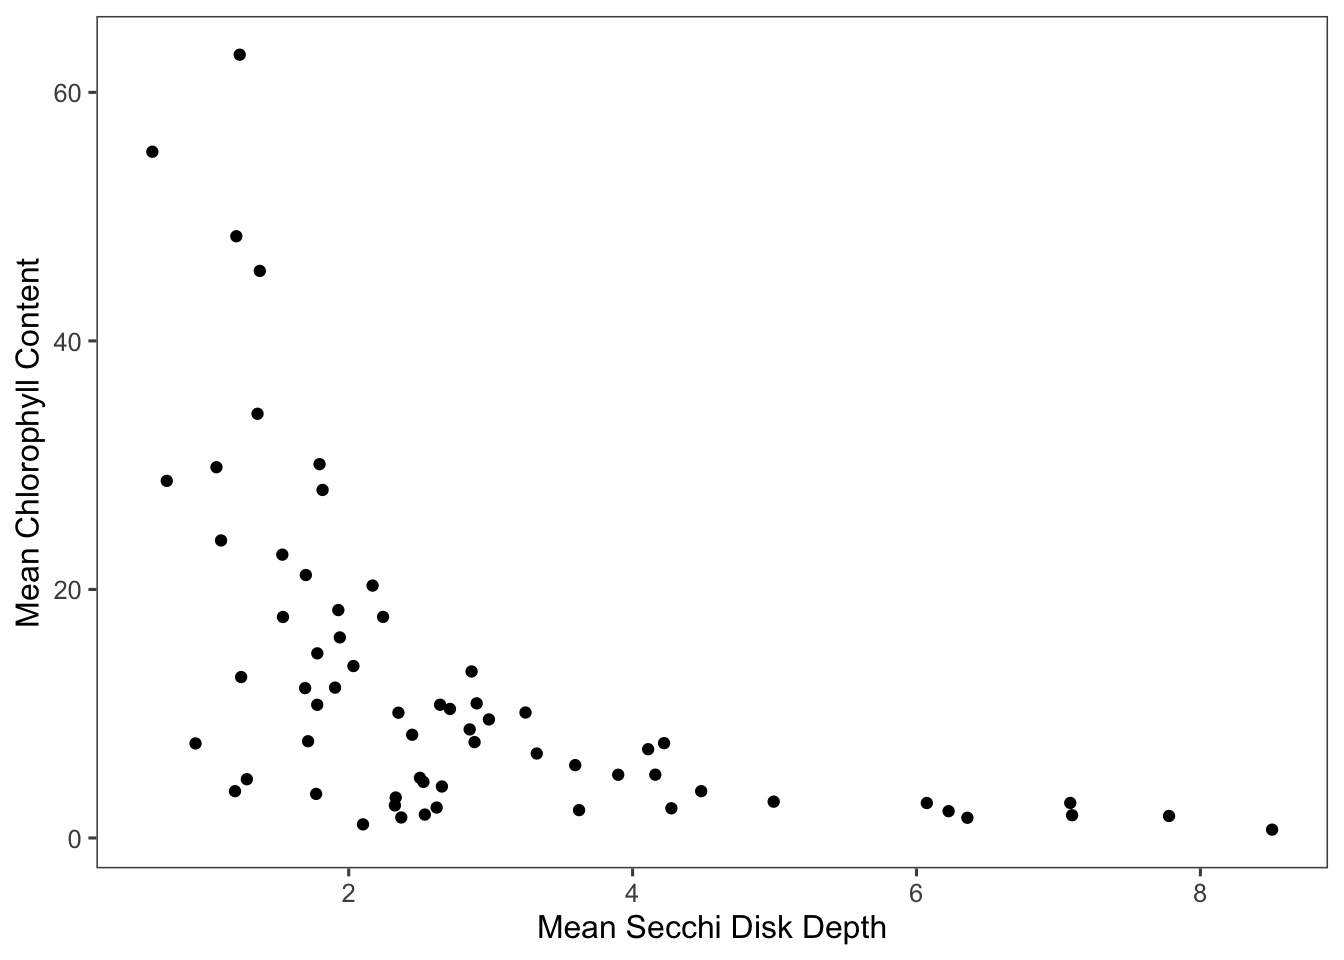 Chlorophyll content has a negative correlation with Secchi disk depth at sites with at least 200 observations.